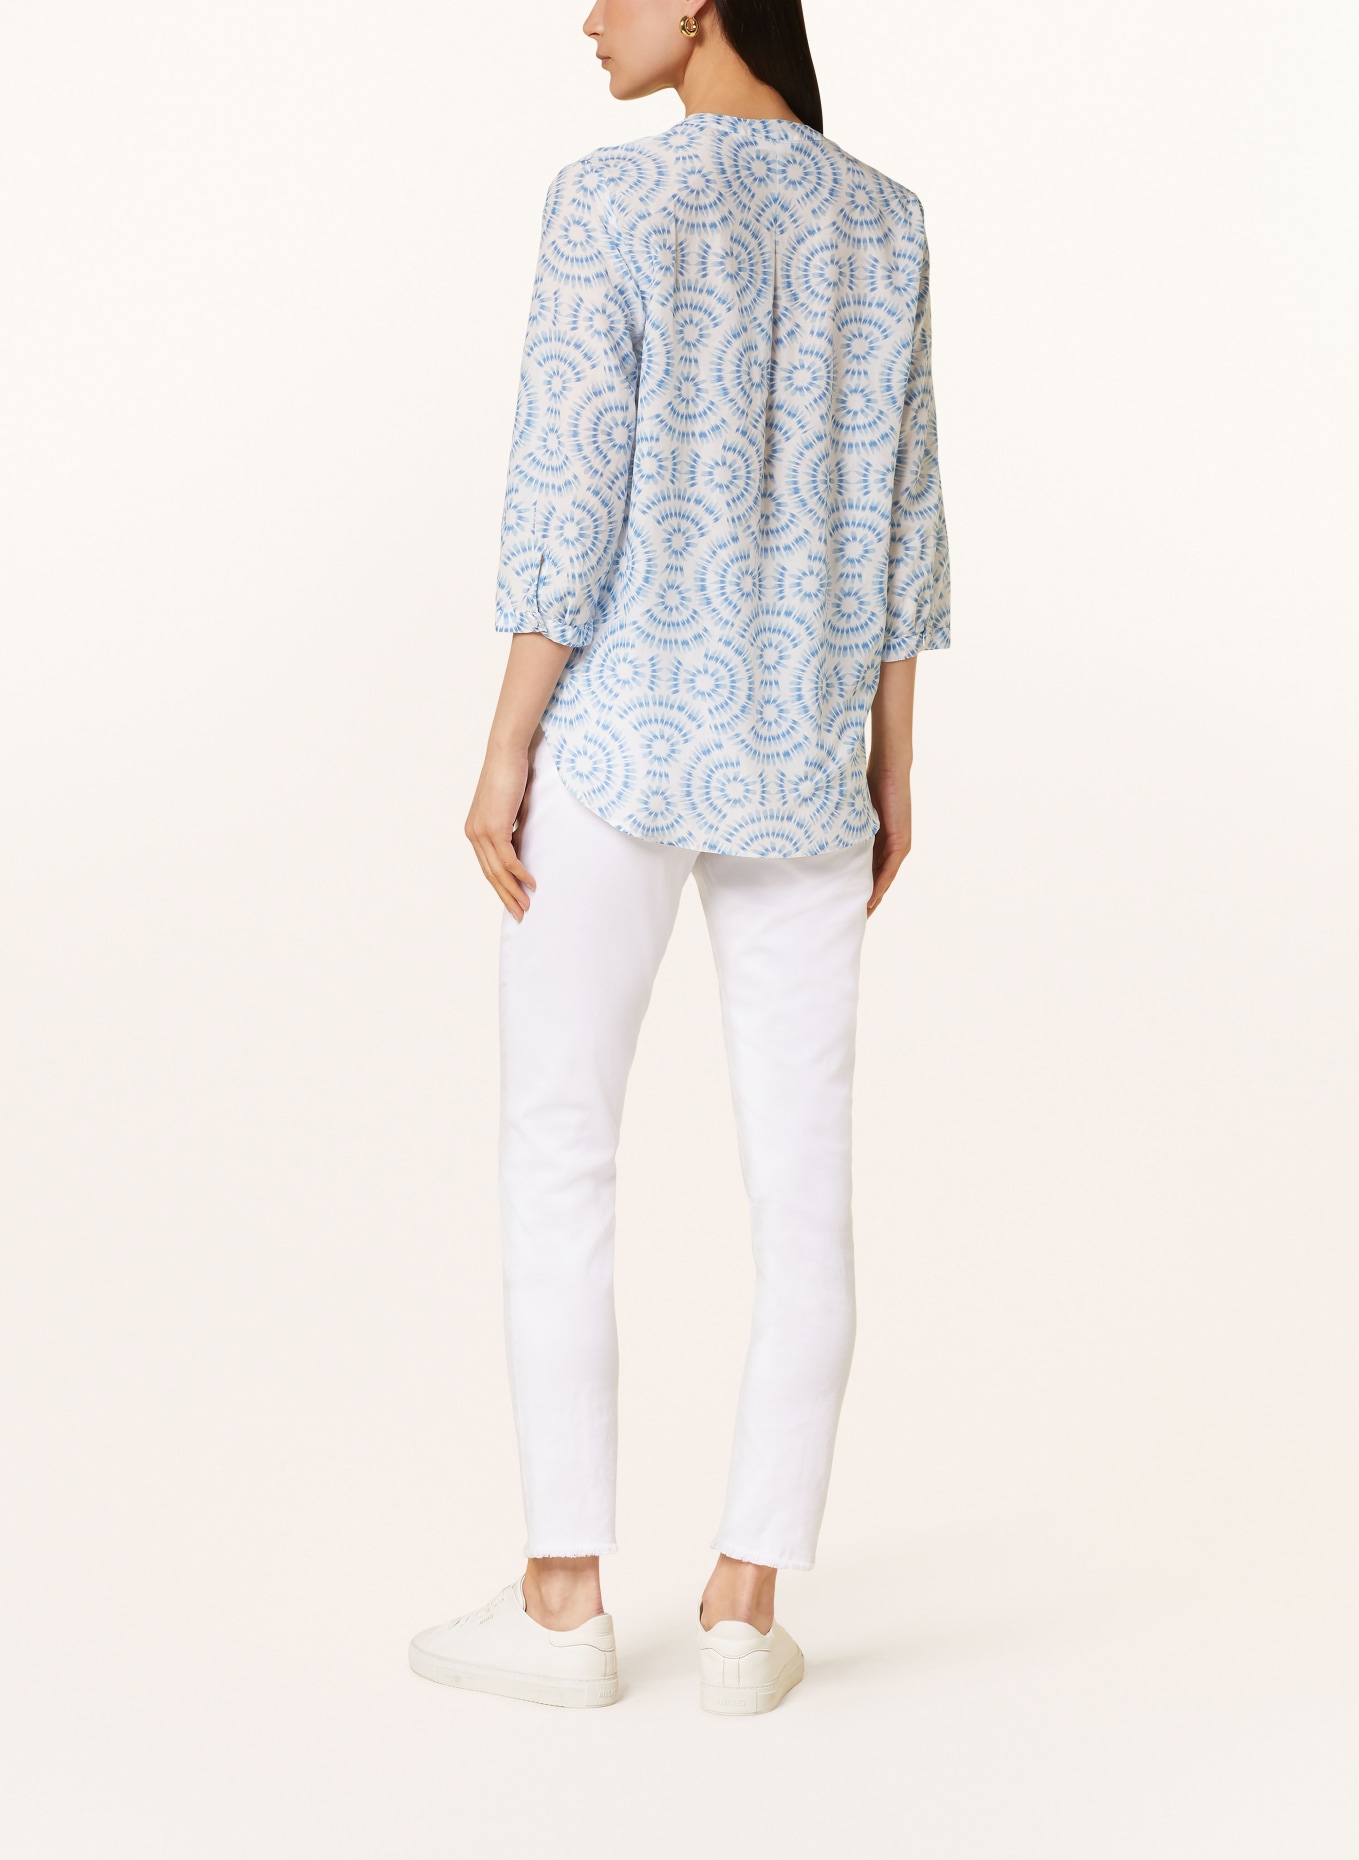 ETERNA Shirt blouse with 3/4 sleeves, Color: LIGHT BLUE/ WHITE (Image 3)